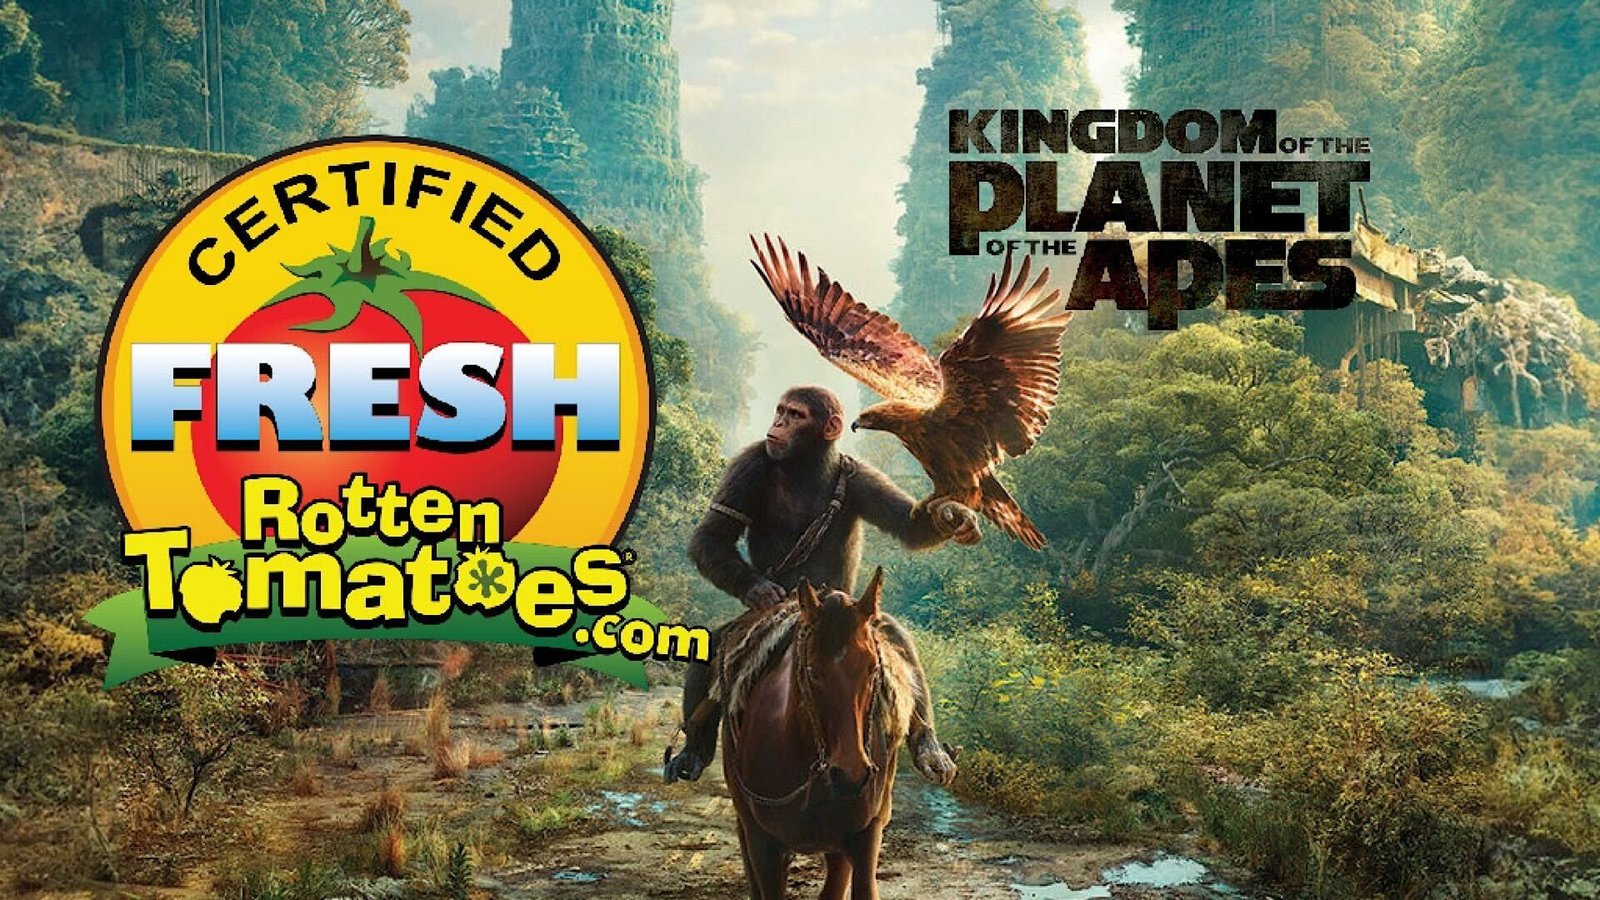 Kingdom of the Planet of the Apes Continues Franchise's Hot Rotten Tomatoes Streak